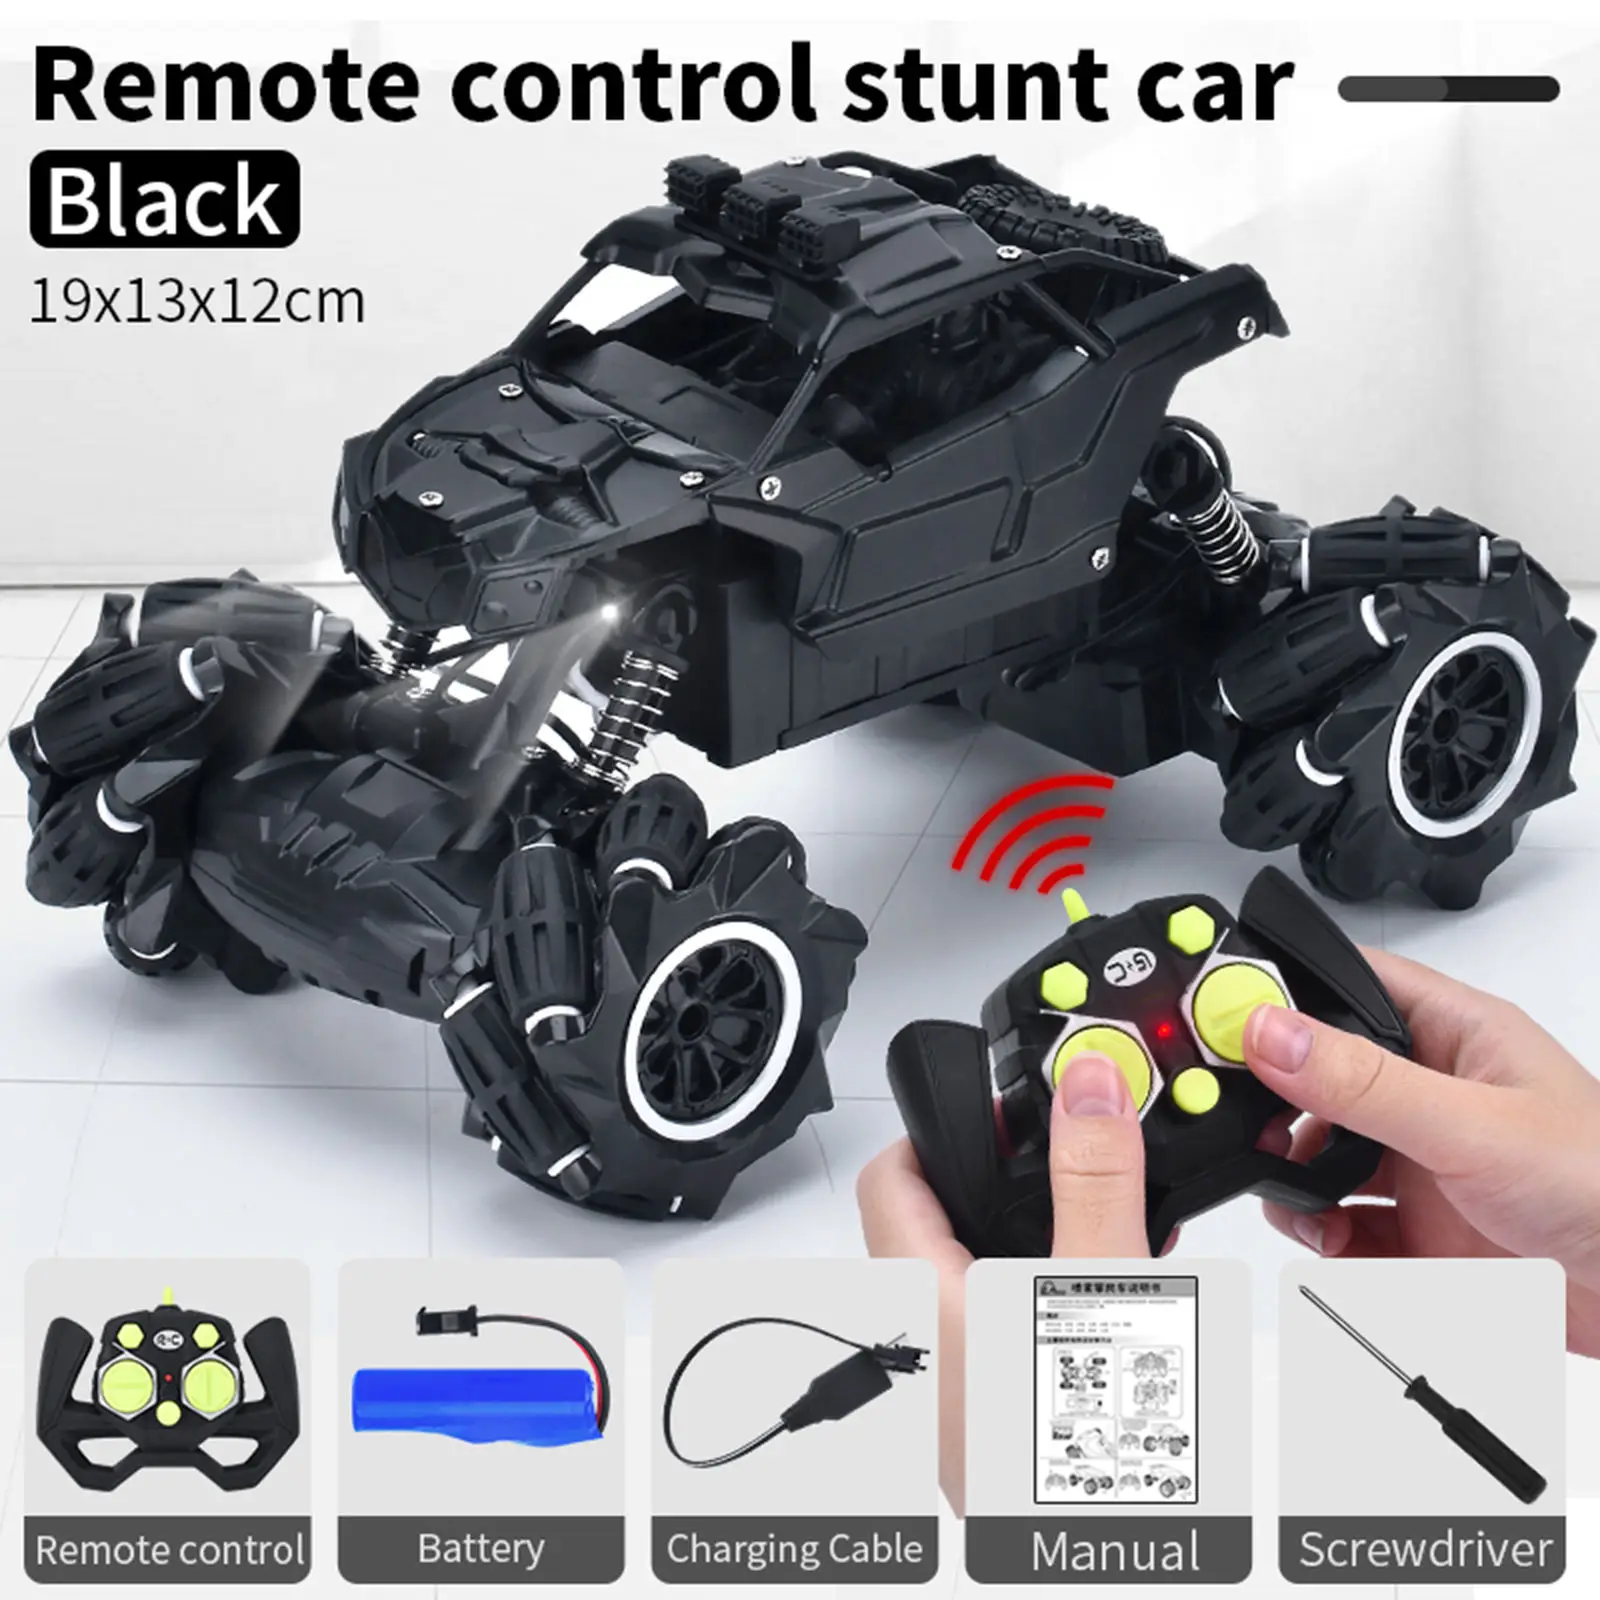 Stunt Remote Control RC Car Four-Wheel DriveVersion Toy 30 Min Play TimeFor 6+ Children andAdults Electric Car Child